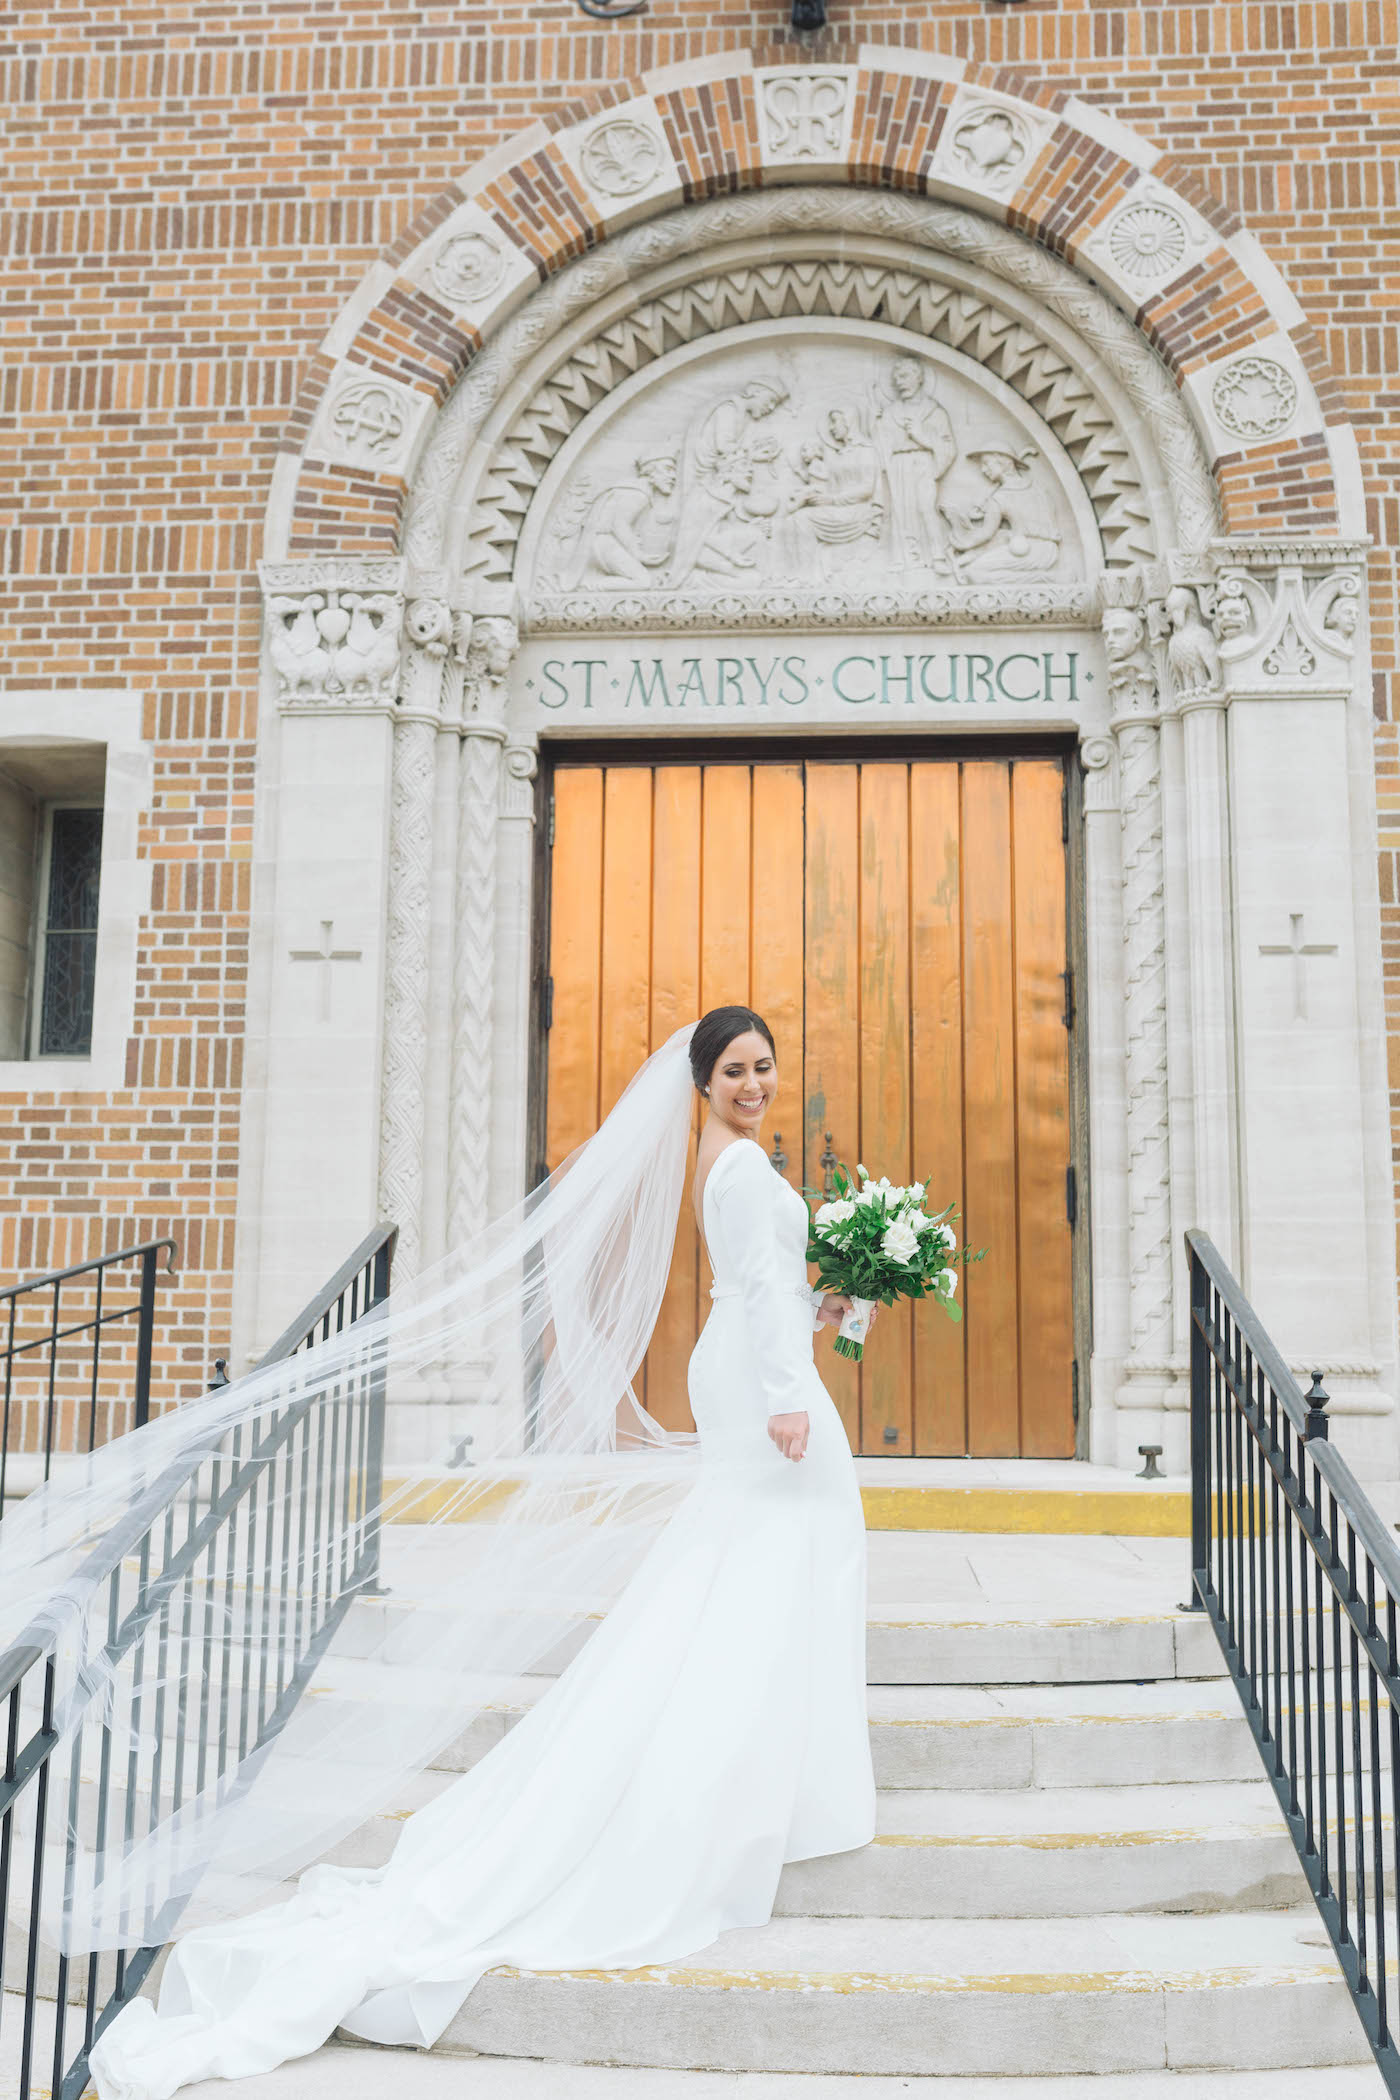 Classic Florida Bride Wearing White Mikaella Bridal Wedding Dress with Swoop Scallop Neckline, Long Sleeves, Holding Elegant Bouquet with Ivory Roses and Greenery | Ceremony Wedding Venue St. Mary Our Lady of Grace Catholic Church in St. Petersburg | Tampa Bay Wedding Planner Parties A'La Carte | Wedding Florist Bruce Wayne Florals